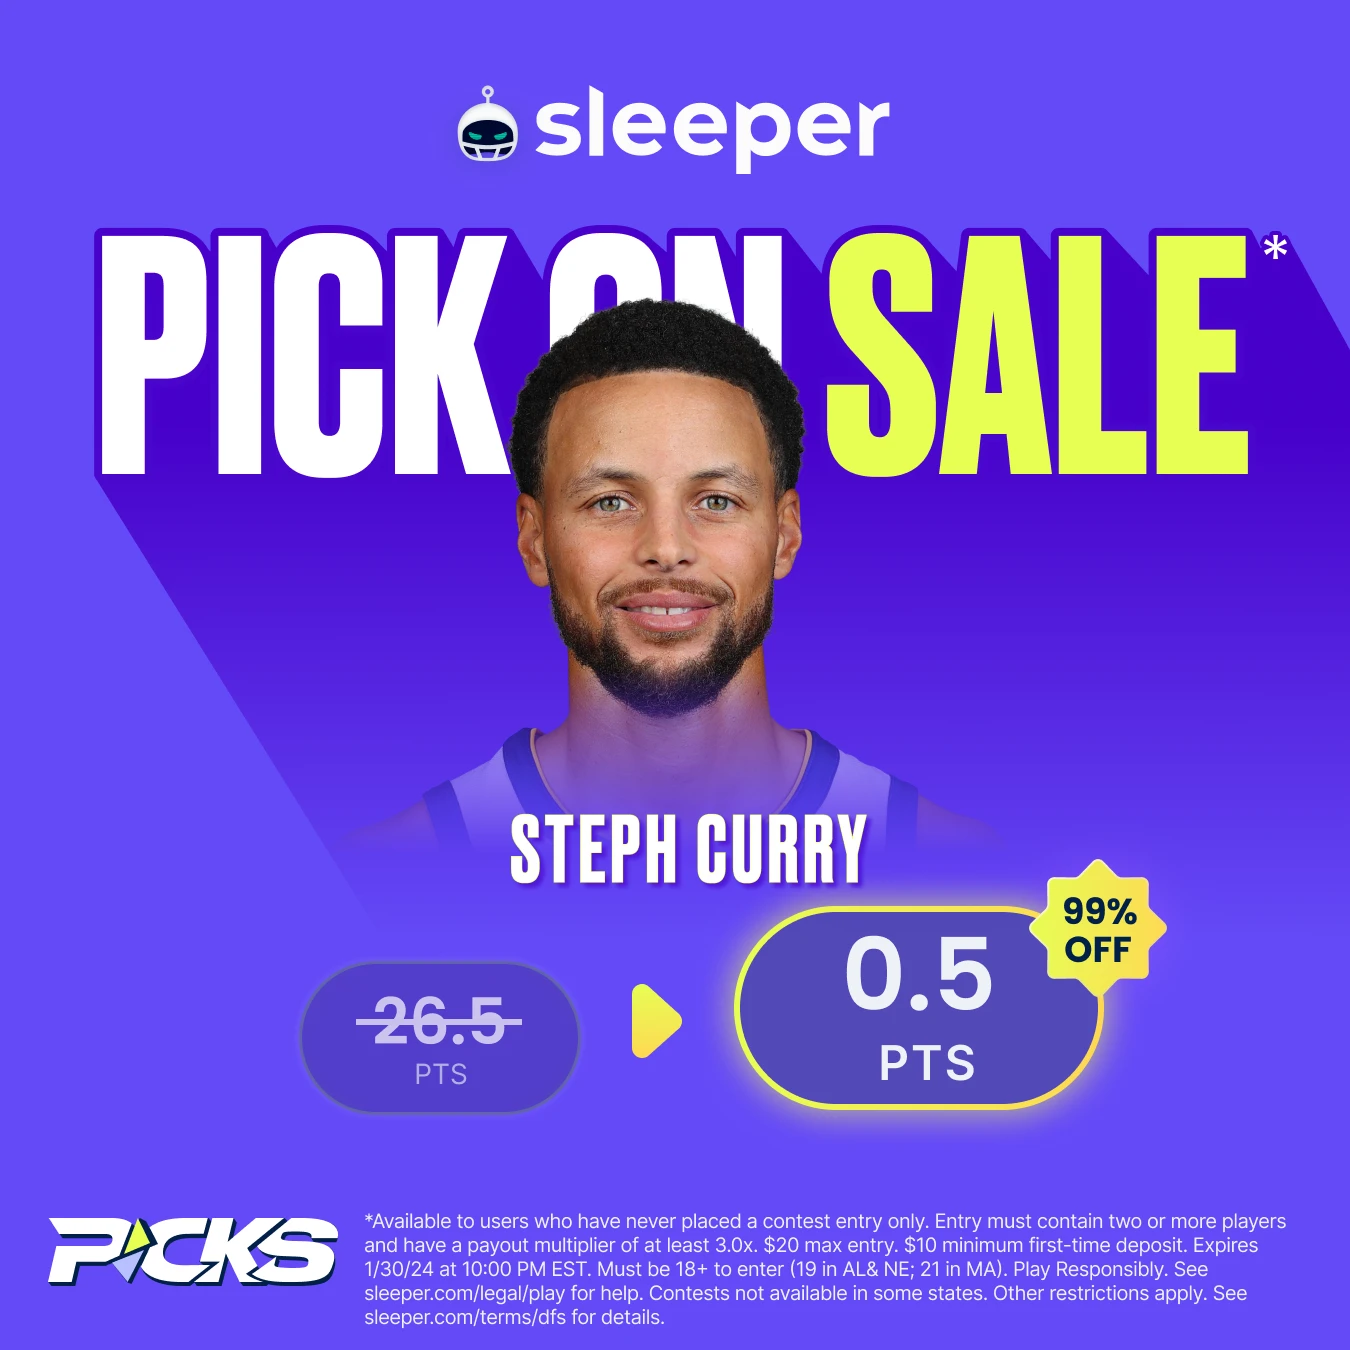 NBA player props special on Sleeper Fantasy for Tuesday, Jan. 30 is Stephen Curry over 0.5 points.